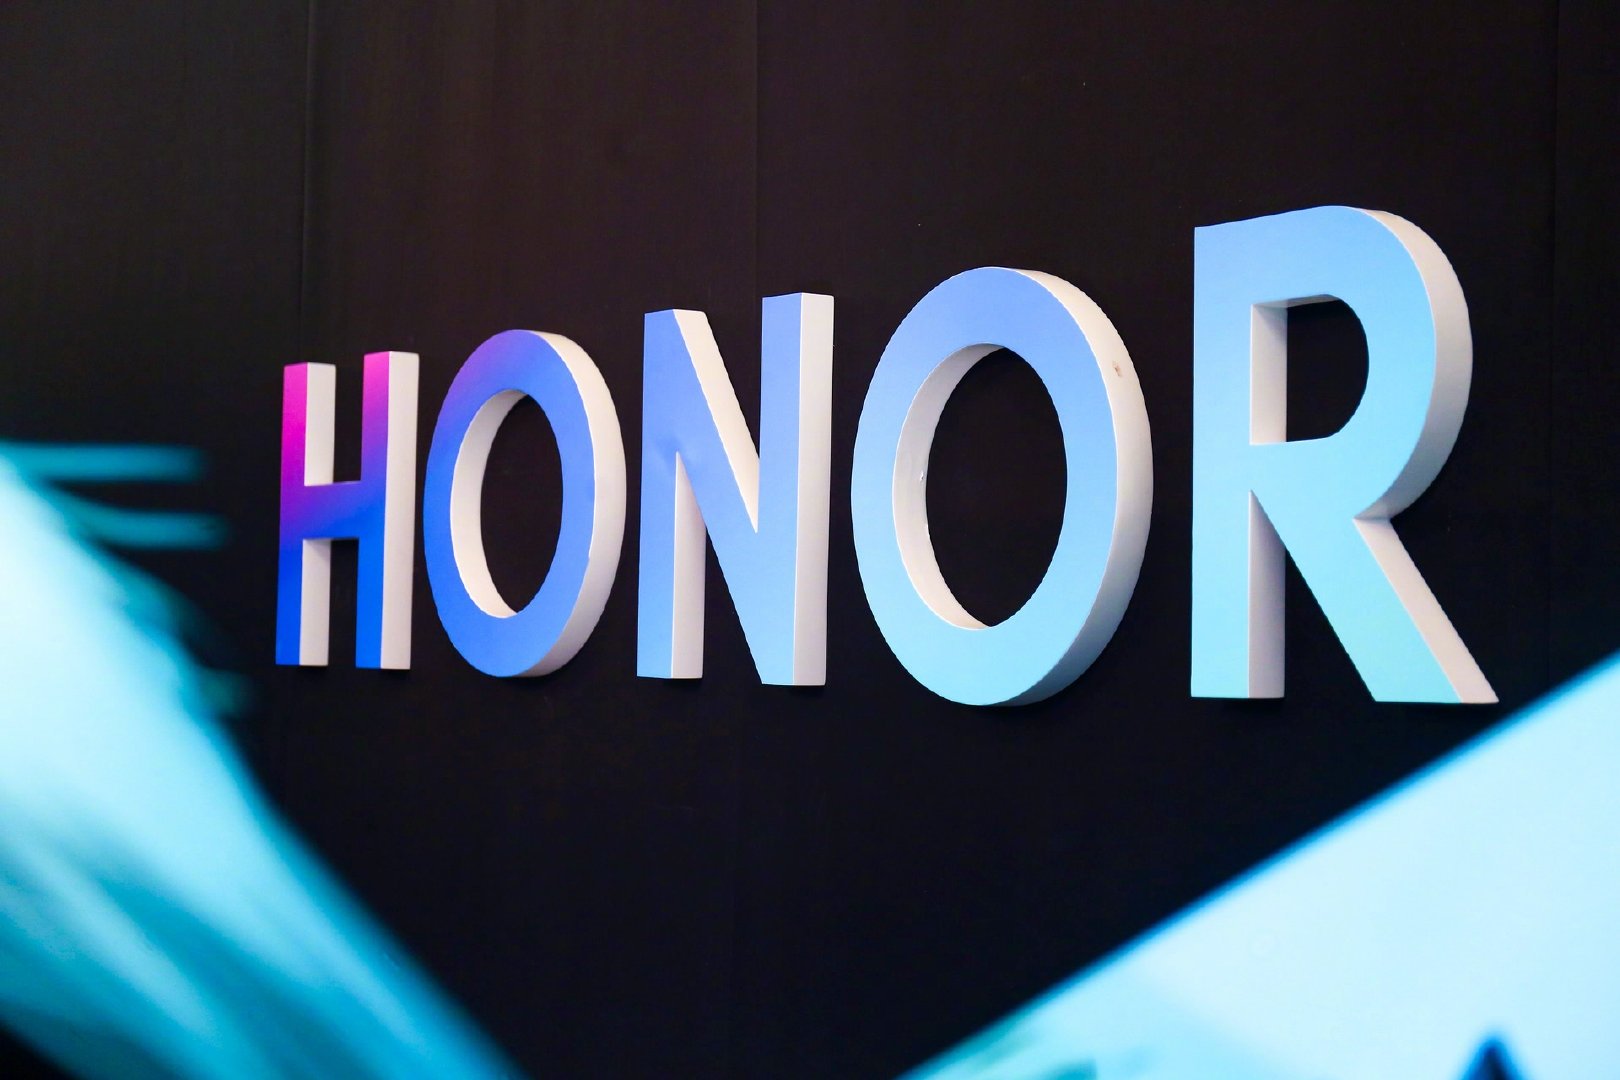 Honor’s first gaming laptop teased to come powered by Intel chipset